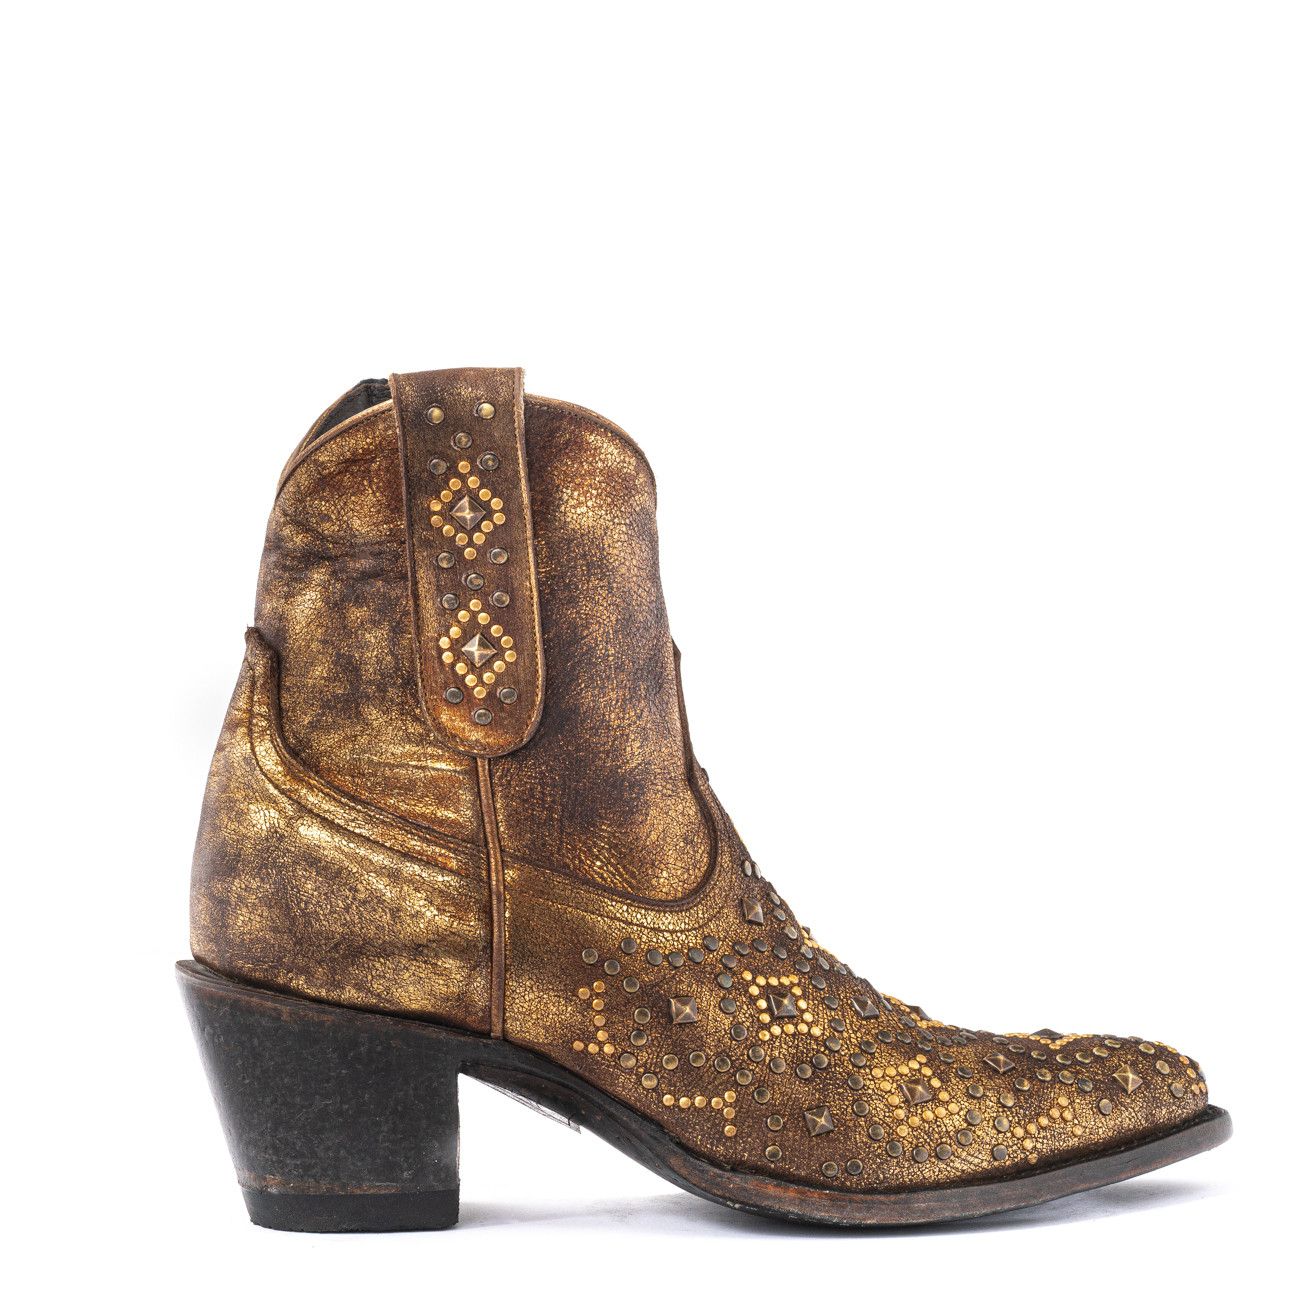 ELECTRA GOLD USED COGNAC POINTED TOE ANKLE BOOTS WITH    STUDS AND SIDE ZIP CLOSURE    Total heel height 2.6 Inches    100% cow 